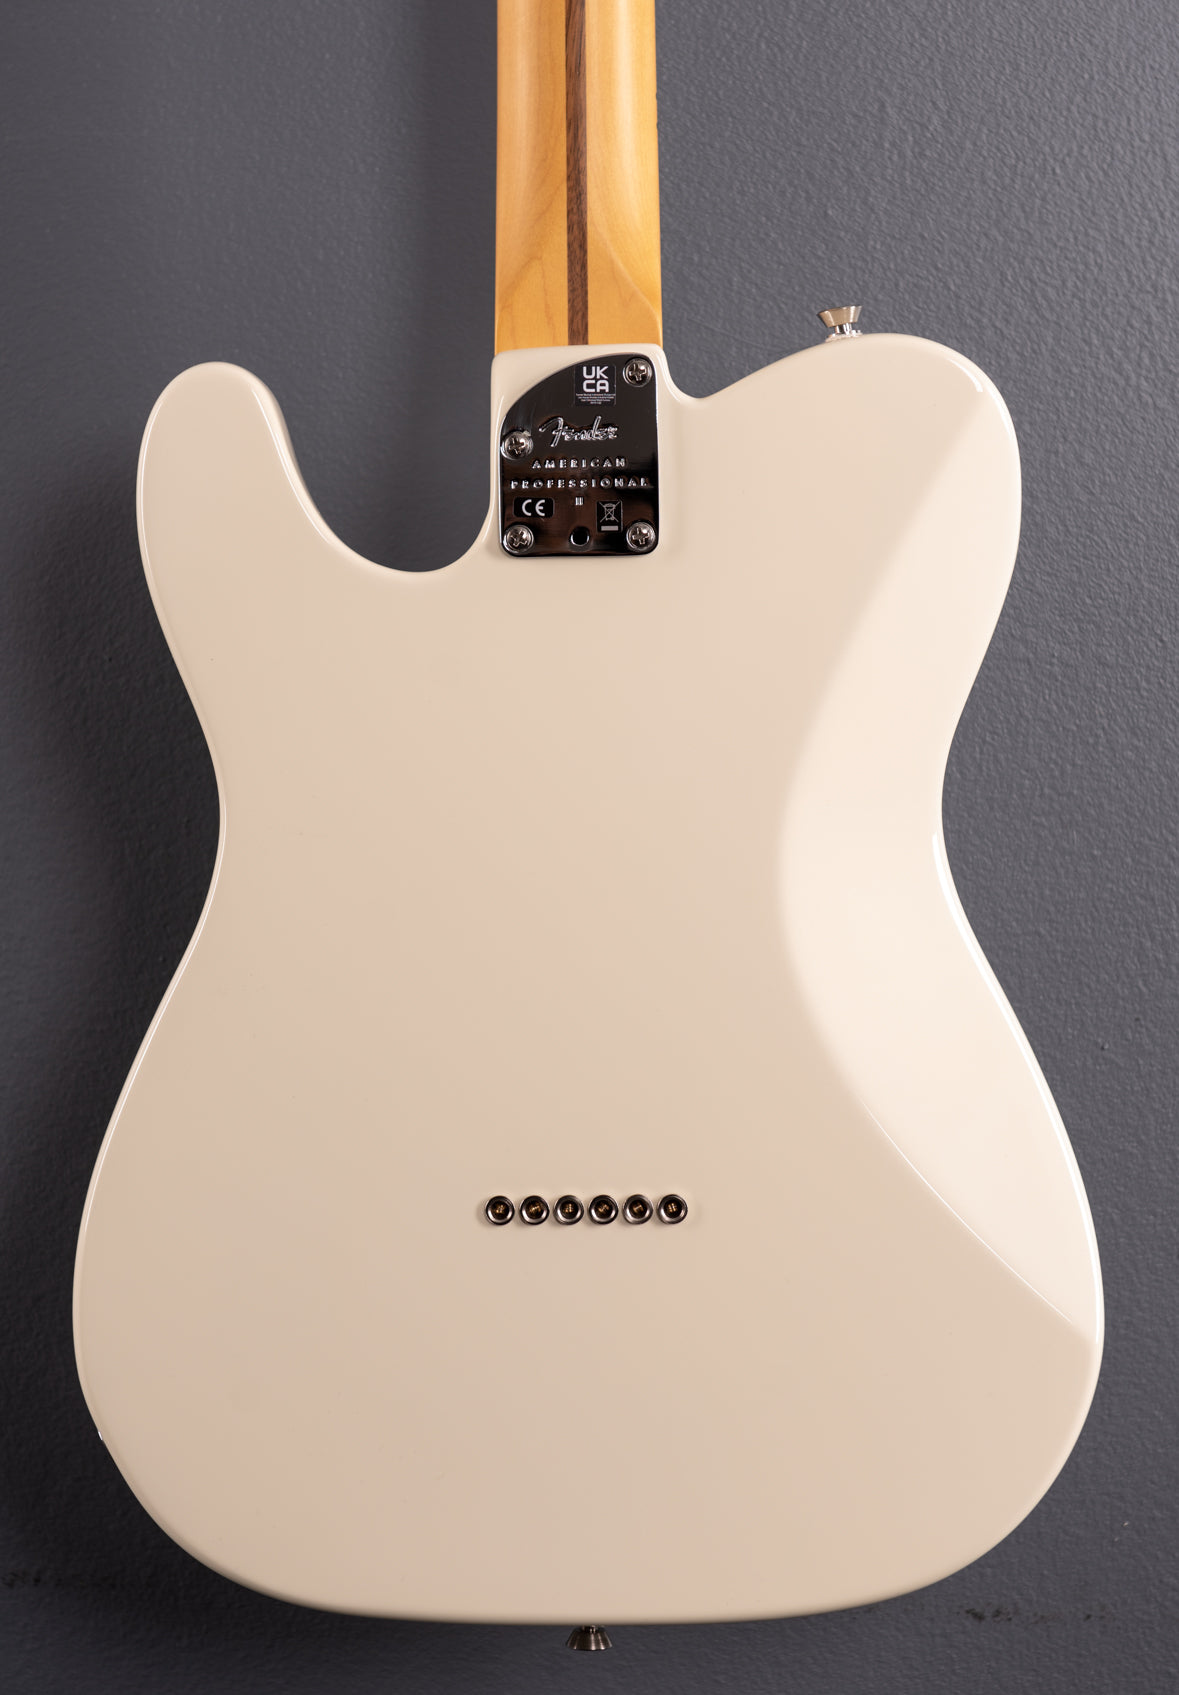 American Professional II Telecaster Deluxe - Olympic White w/Maple